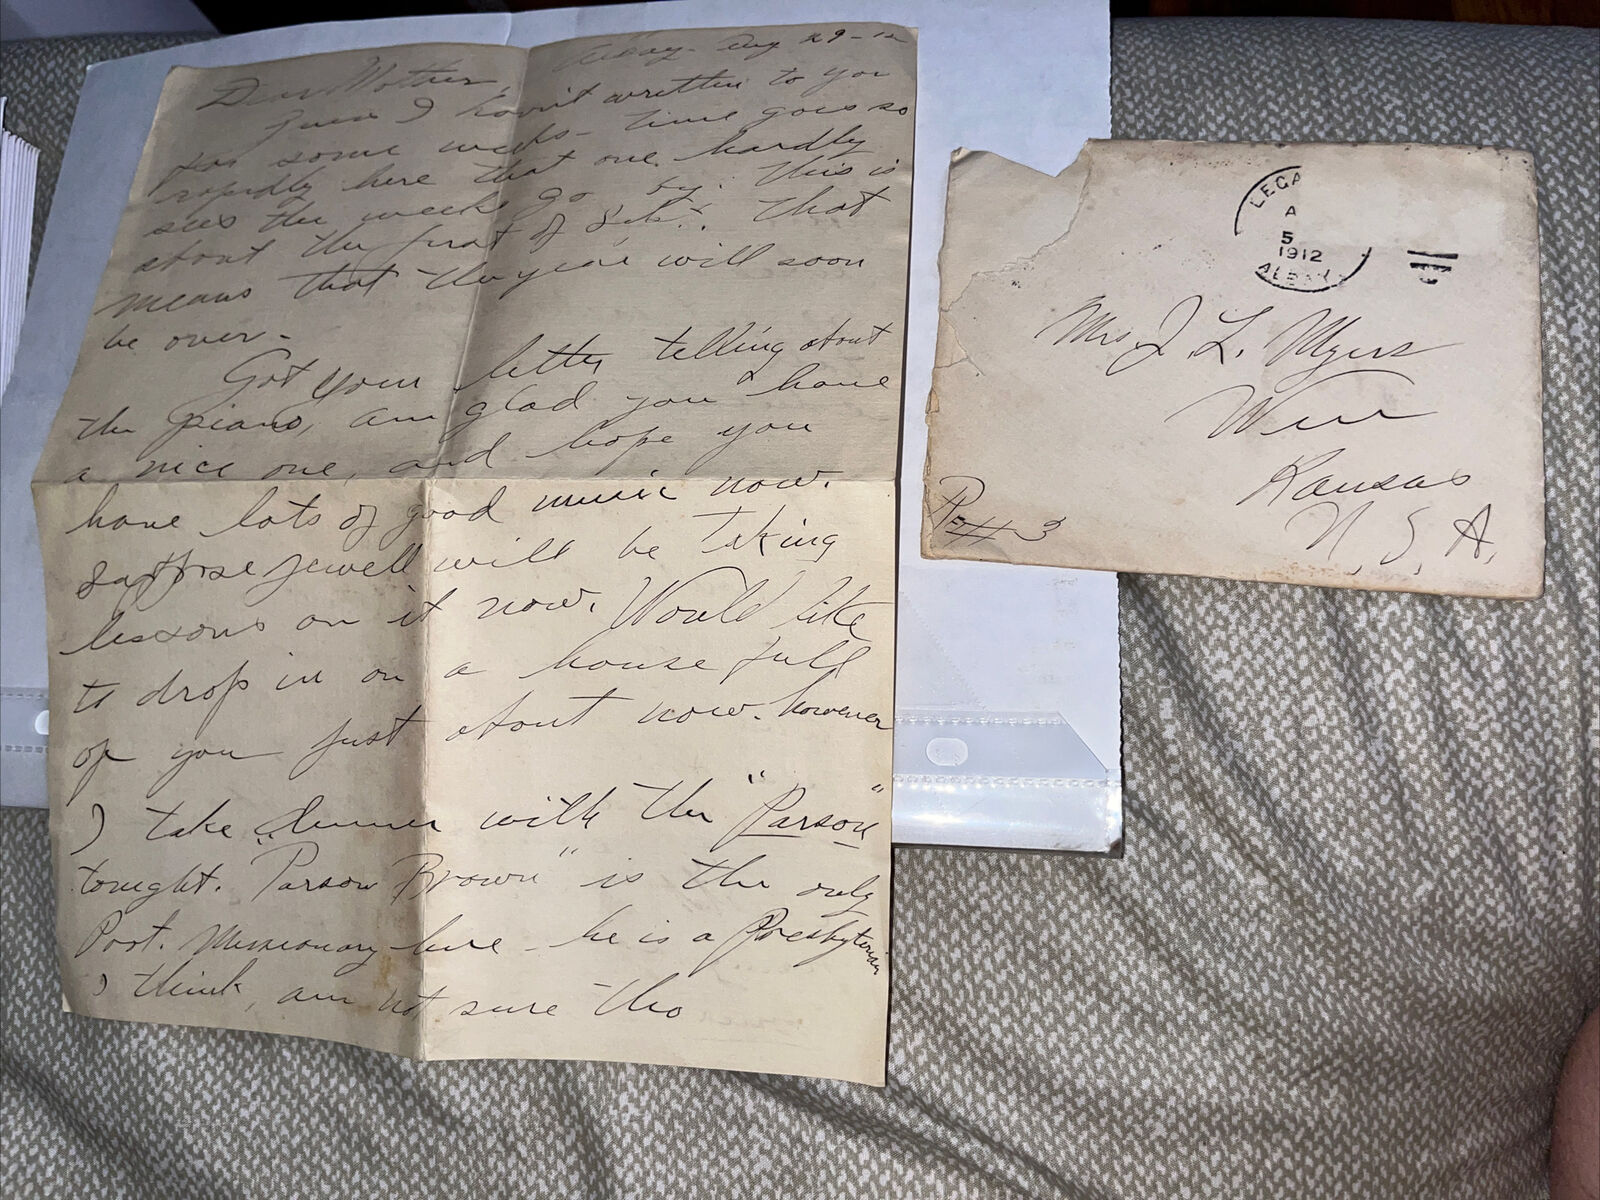 Antique 1912 Albay Philippines Letter to KS Mentions Mentions “Parson Brown”